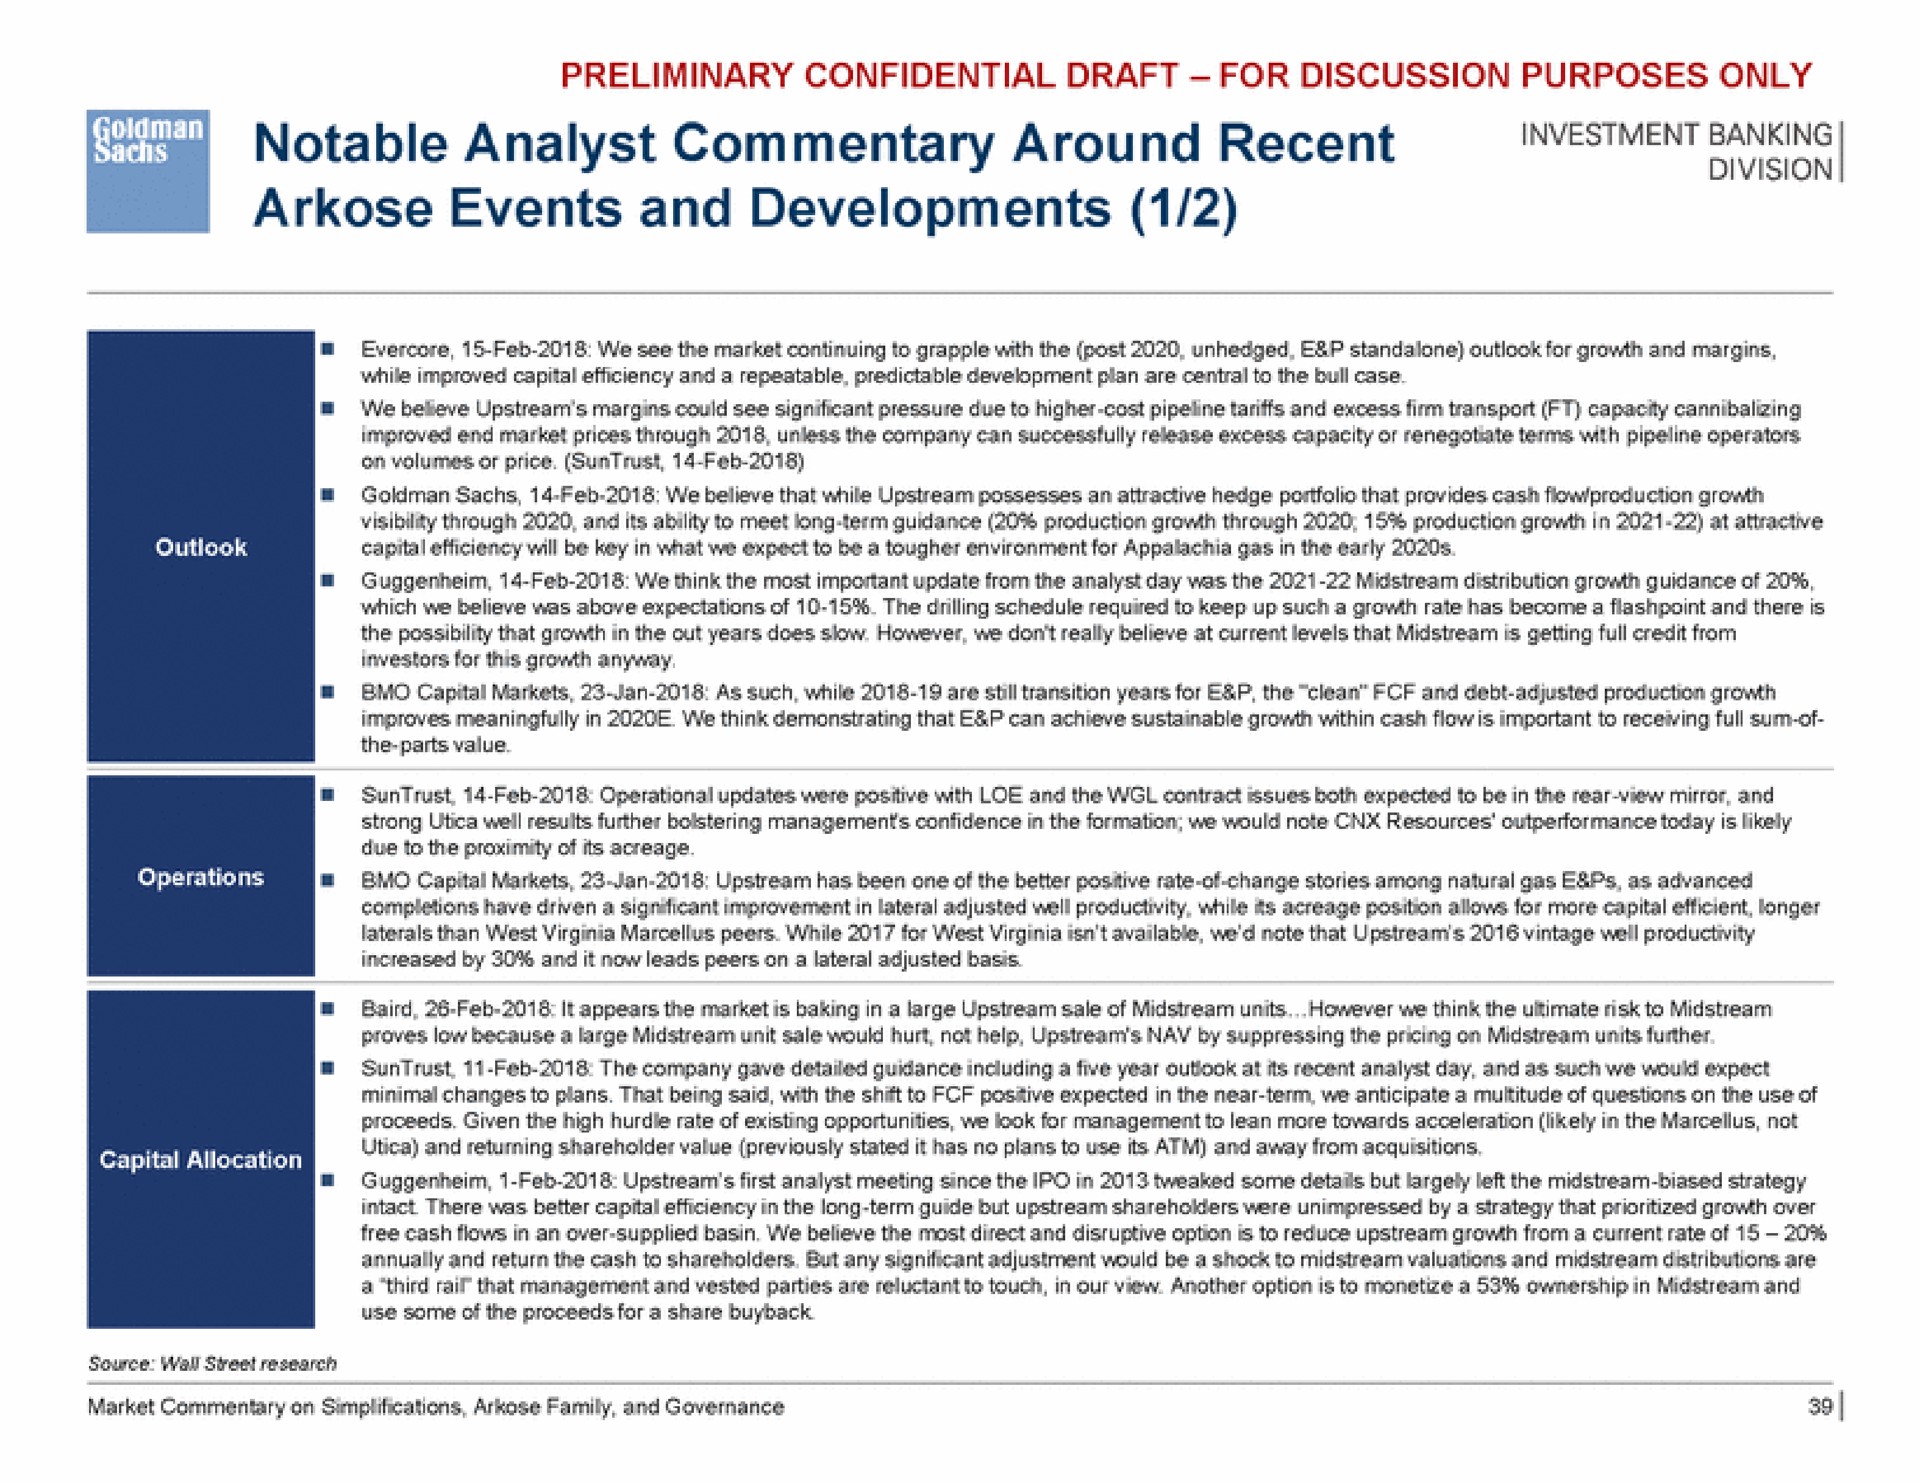 notable analyst commentary around recent arkose events and developments | Goldman Sachs